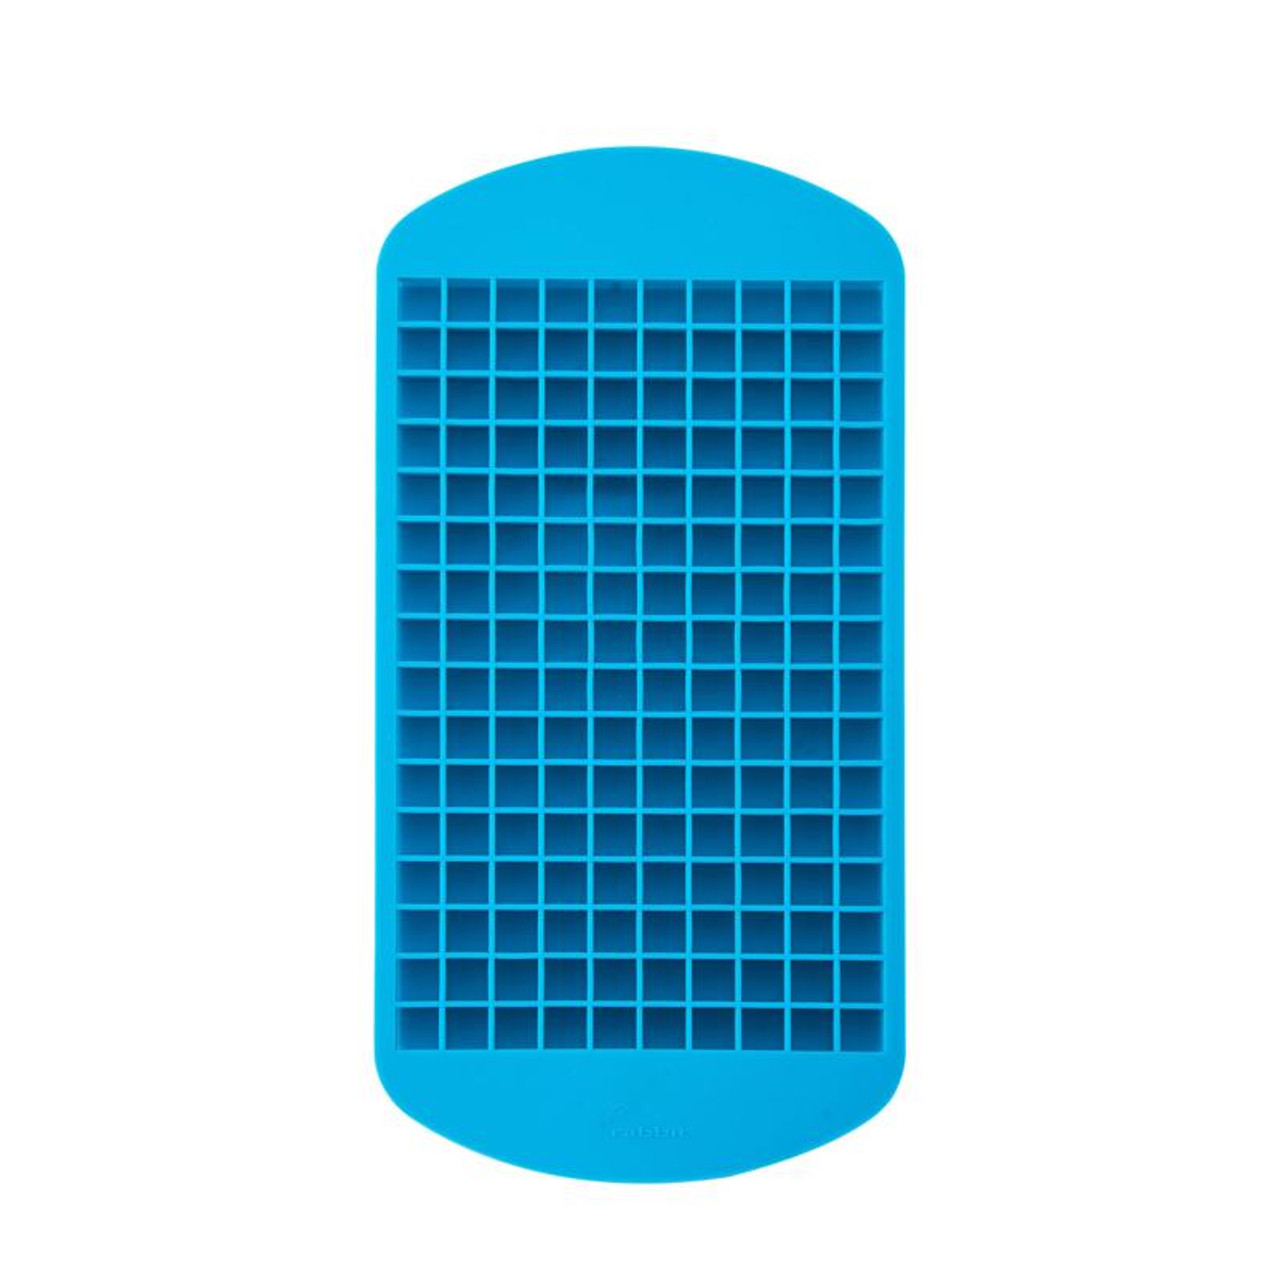 6026547 CRUSHED ICE TRAY BLUE Houdini Blue Silicone Ice Tray (Pack of 1) 